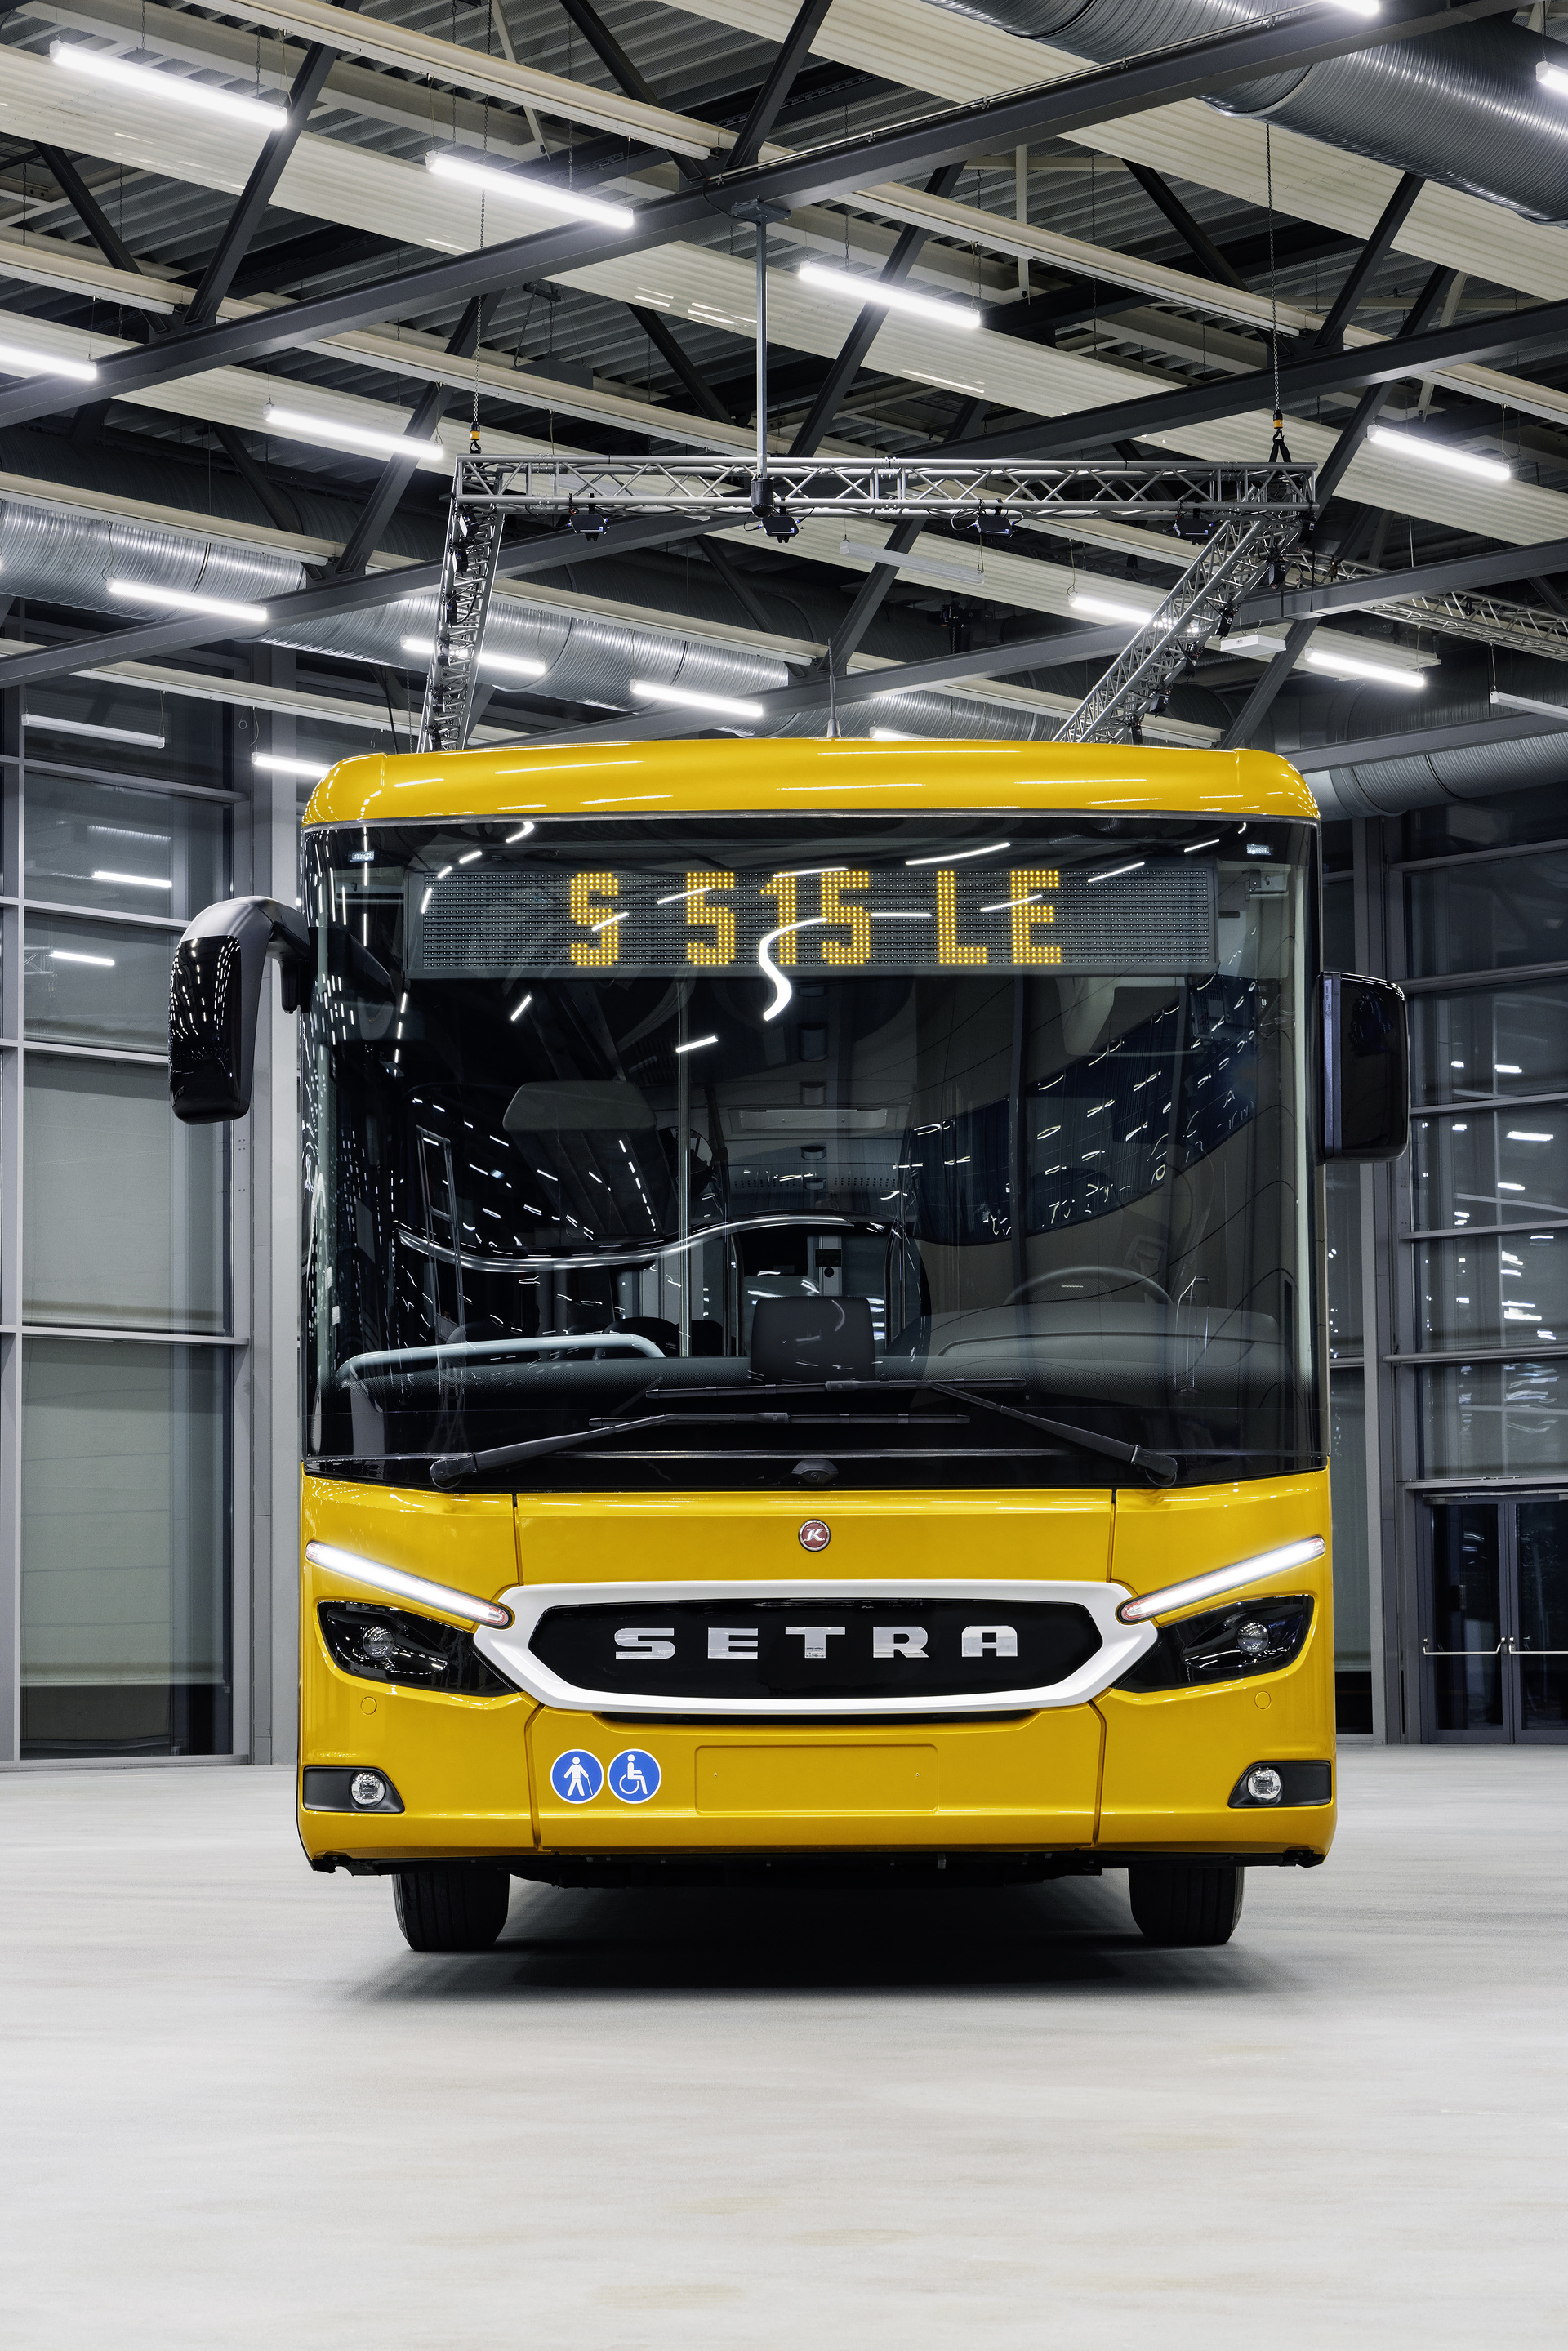 Newly developed Setra MultiClass 500 LE inter-city buses